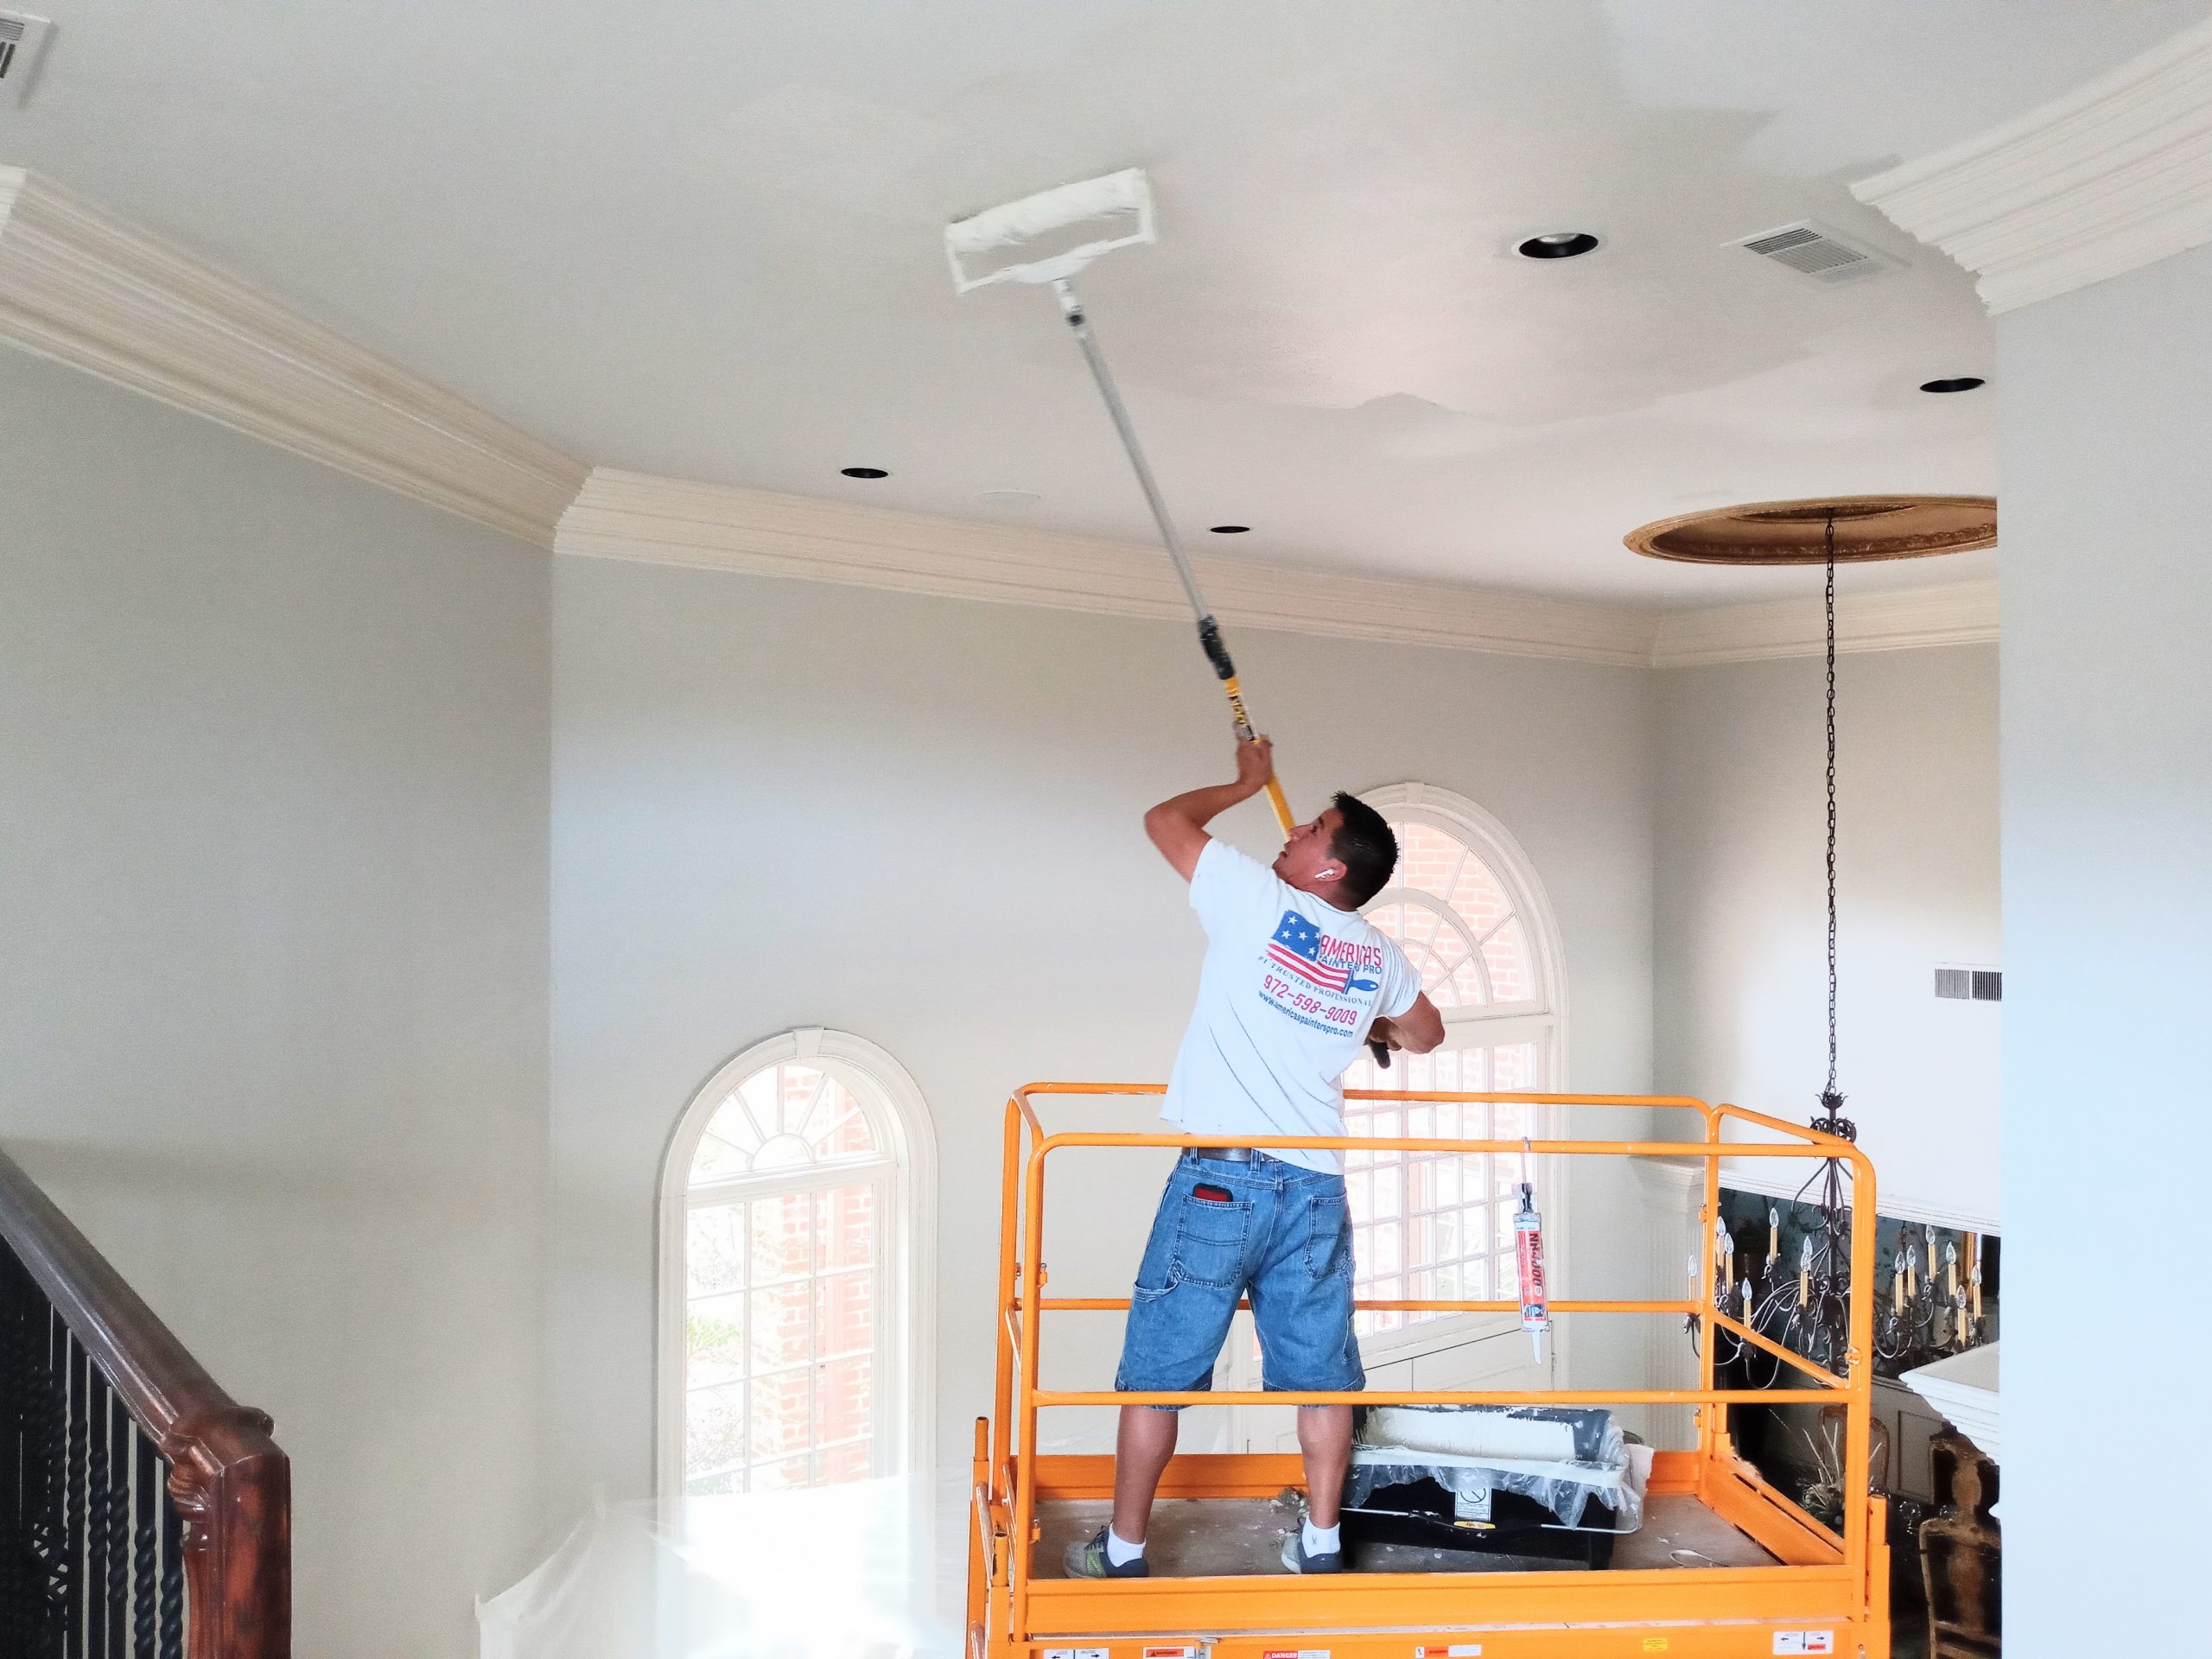 A man painting the ceiling of a house